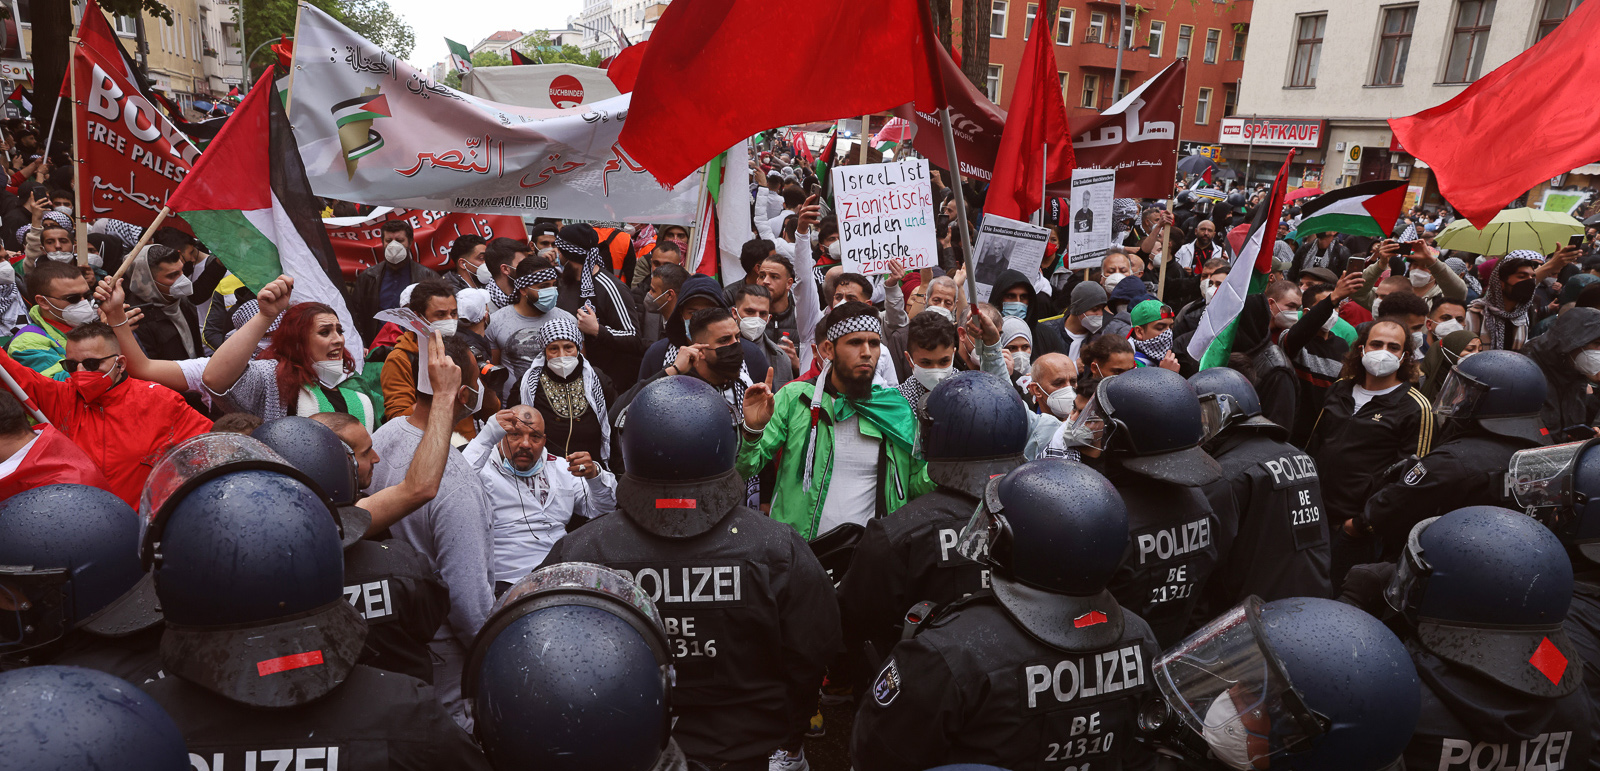 BERLIN, GERMANY - MAY 15: Protesters face riot police as they march on Al Nakba Day to demonstrate for the rights of Palestinians in Neukoelln district on May 15, 2021 in Berlin, Germany. This year's protests are taking place in the context of ongoing, severe violence between Palestinian militias and Israeli security forces in Israel. Al Nakba Day commemorates the expulsion of hundreds of thousands of Palestinians from Palestine between 1947 and 1949 in the course of conflicts between the nascent state of Israel and neighbouring Arab countries. (Photo by Sean Gallup/Getty Images)